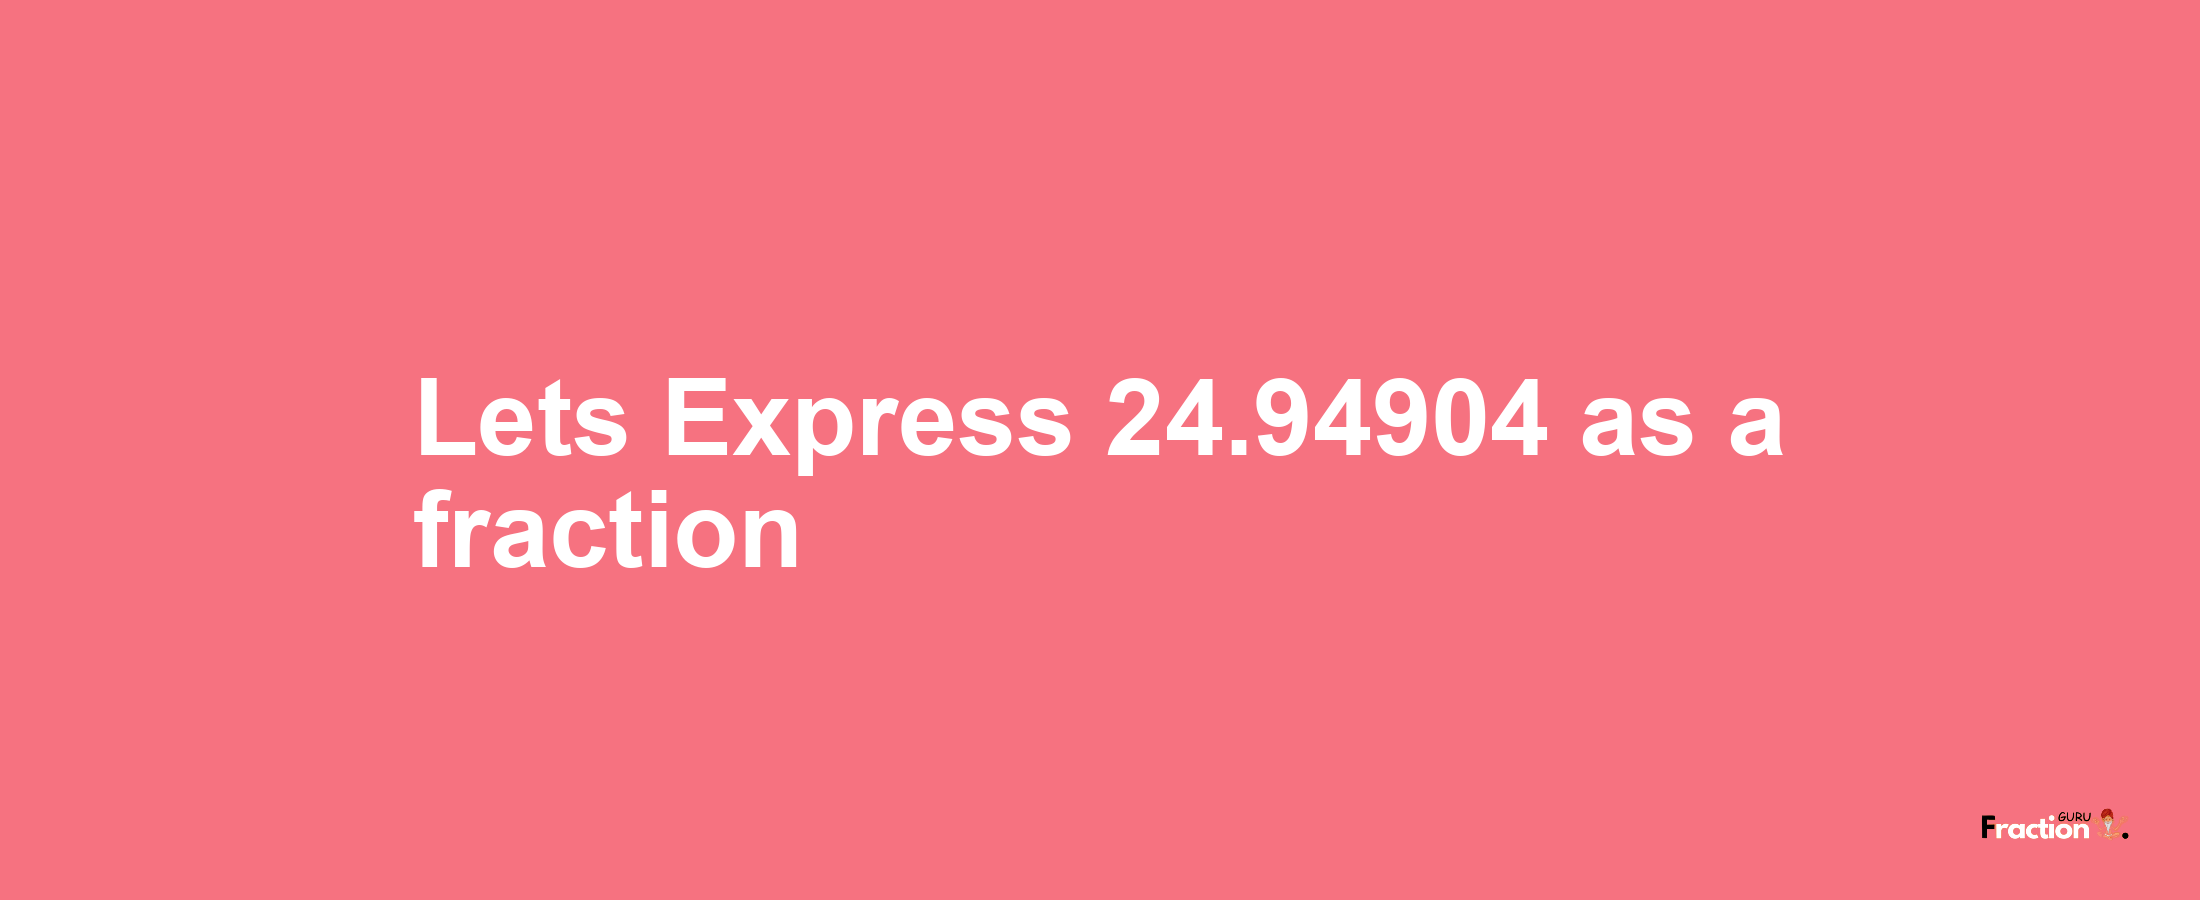 Lets Express 24.94904 as afraction